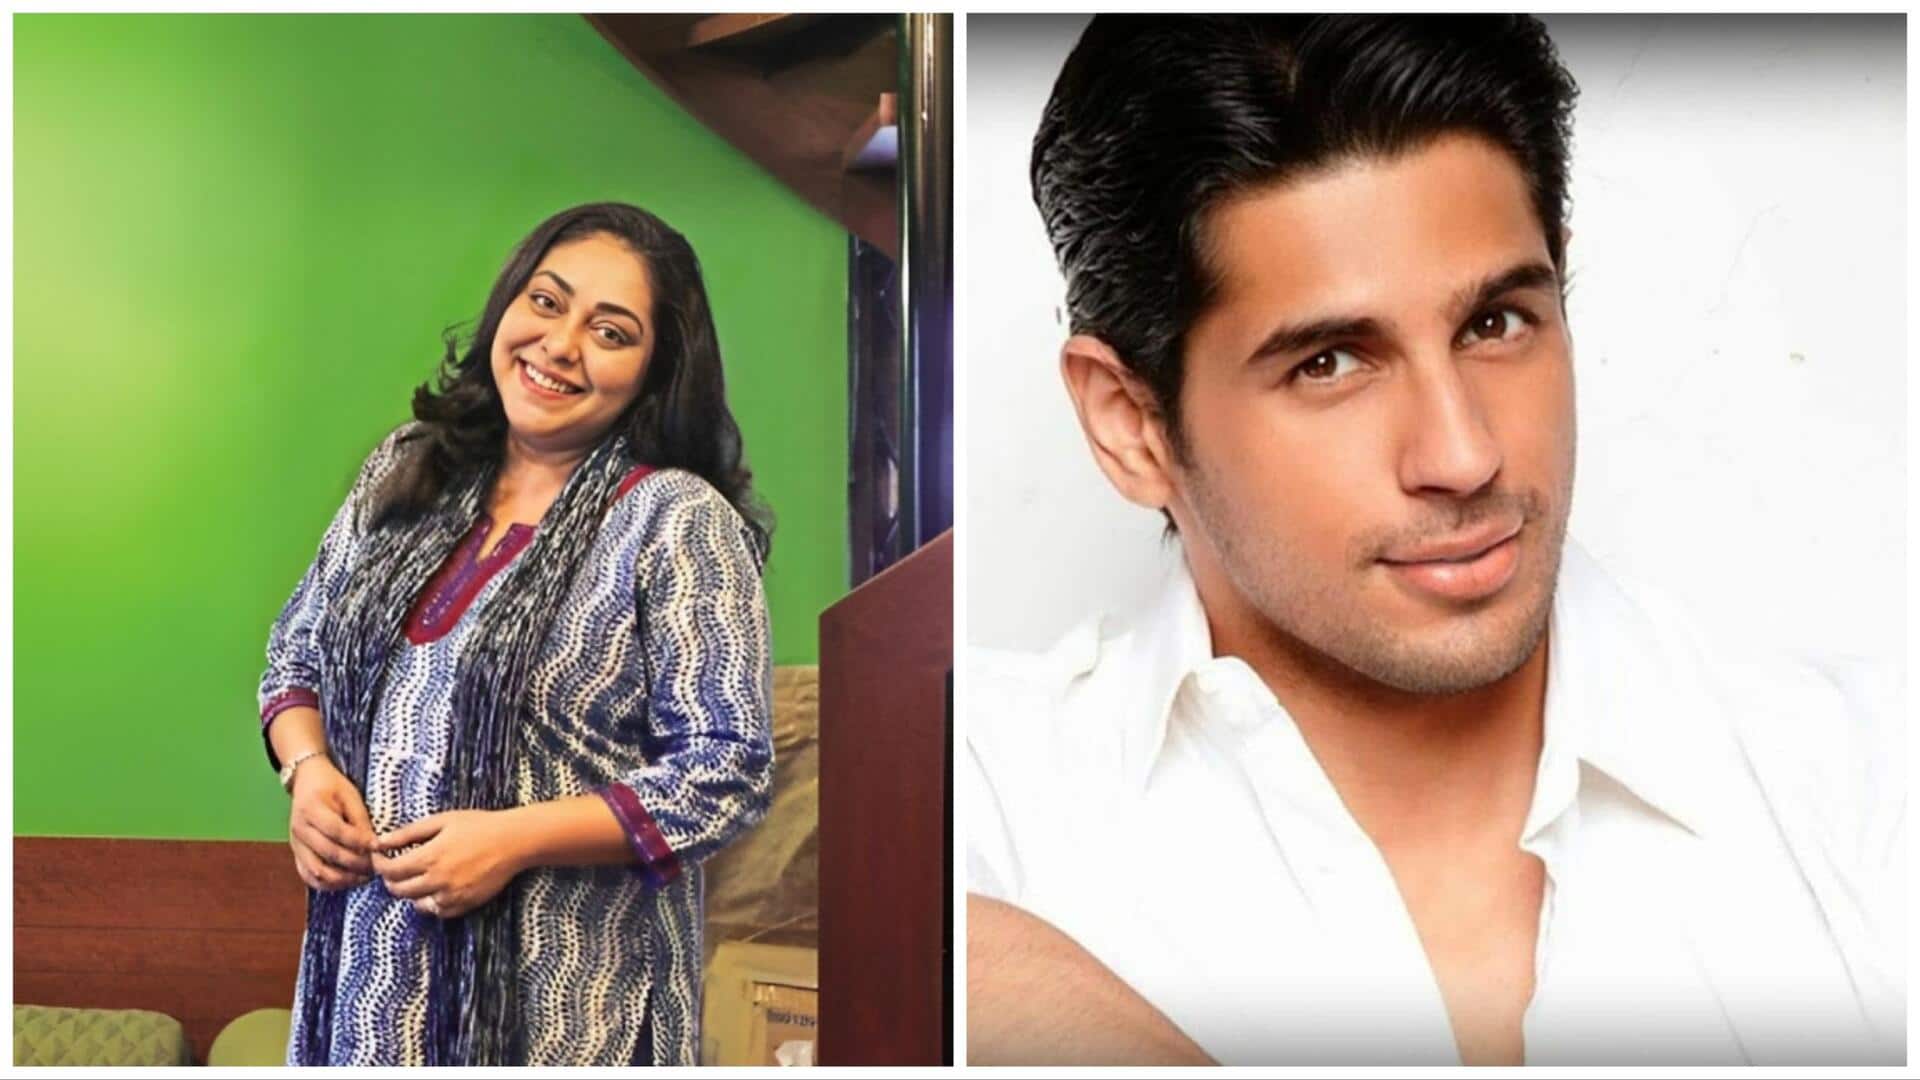 Meghna Gulzar to collaborate with Sidharth Malhotra next? Find out